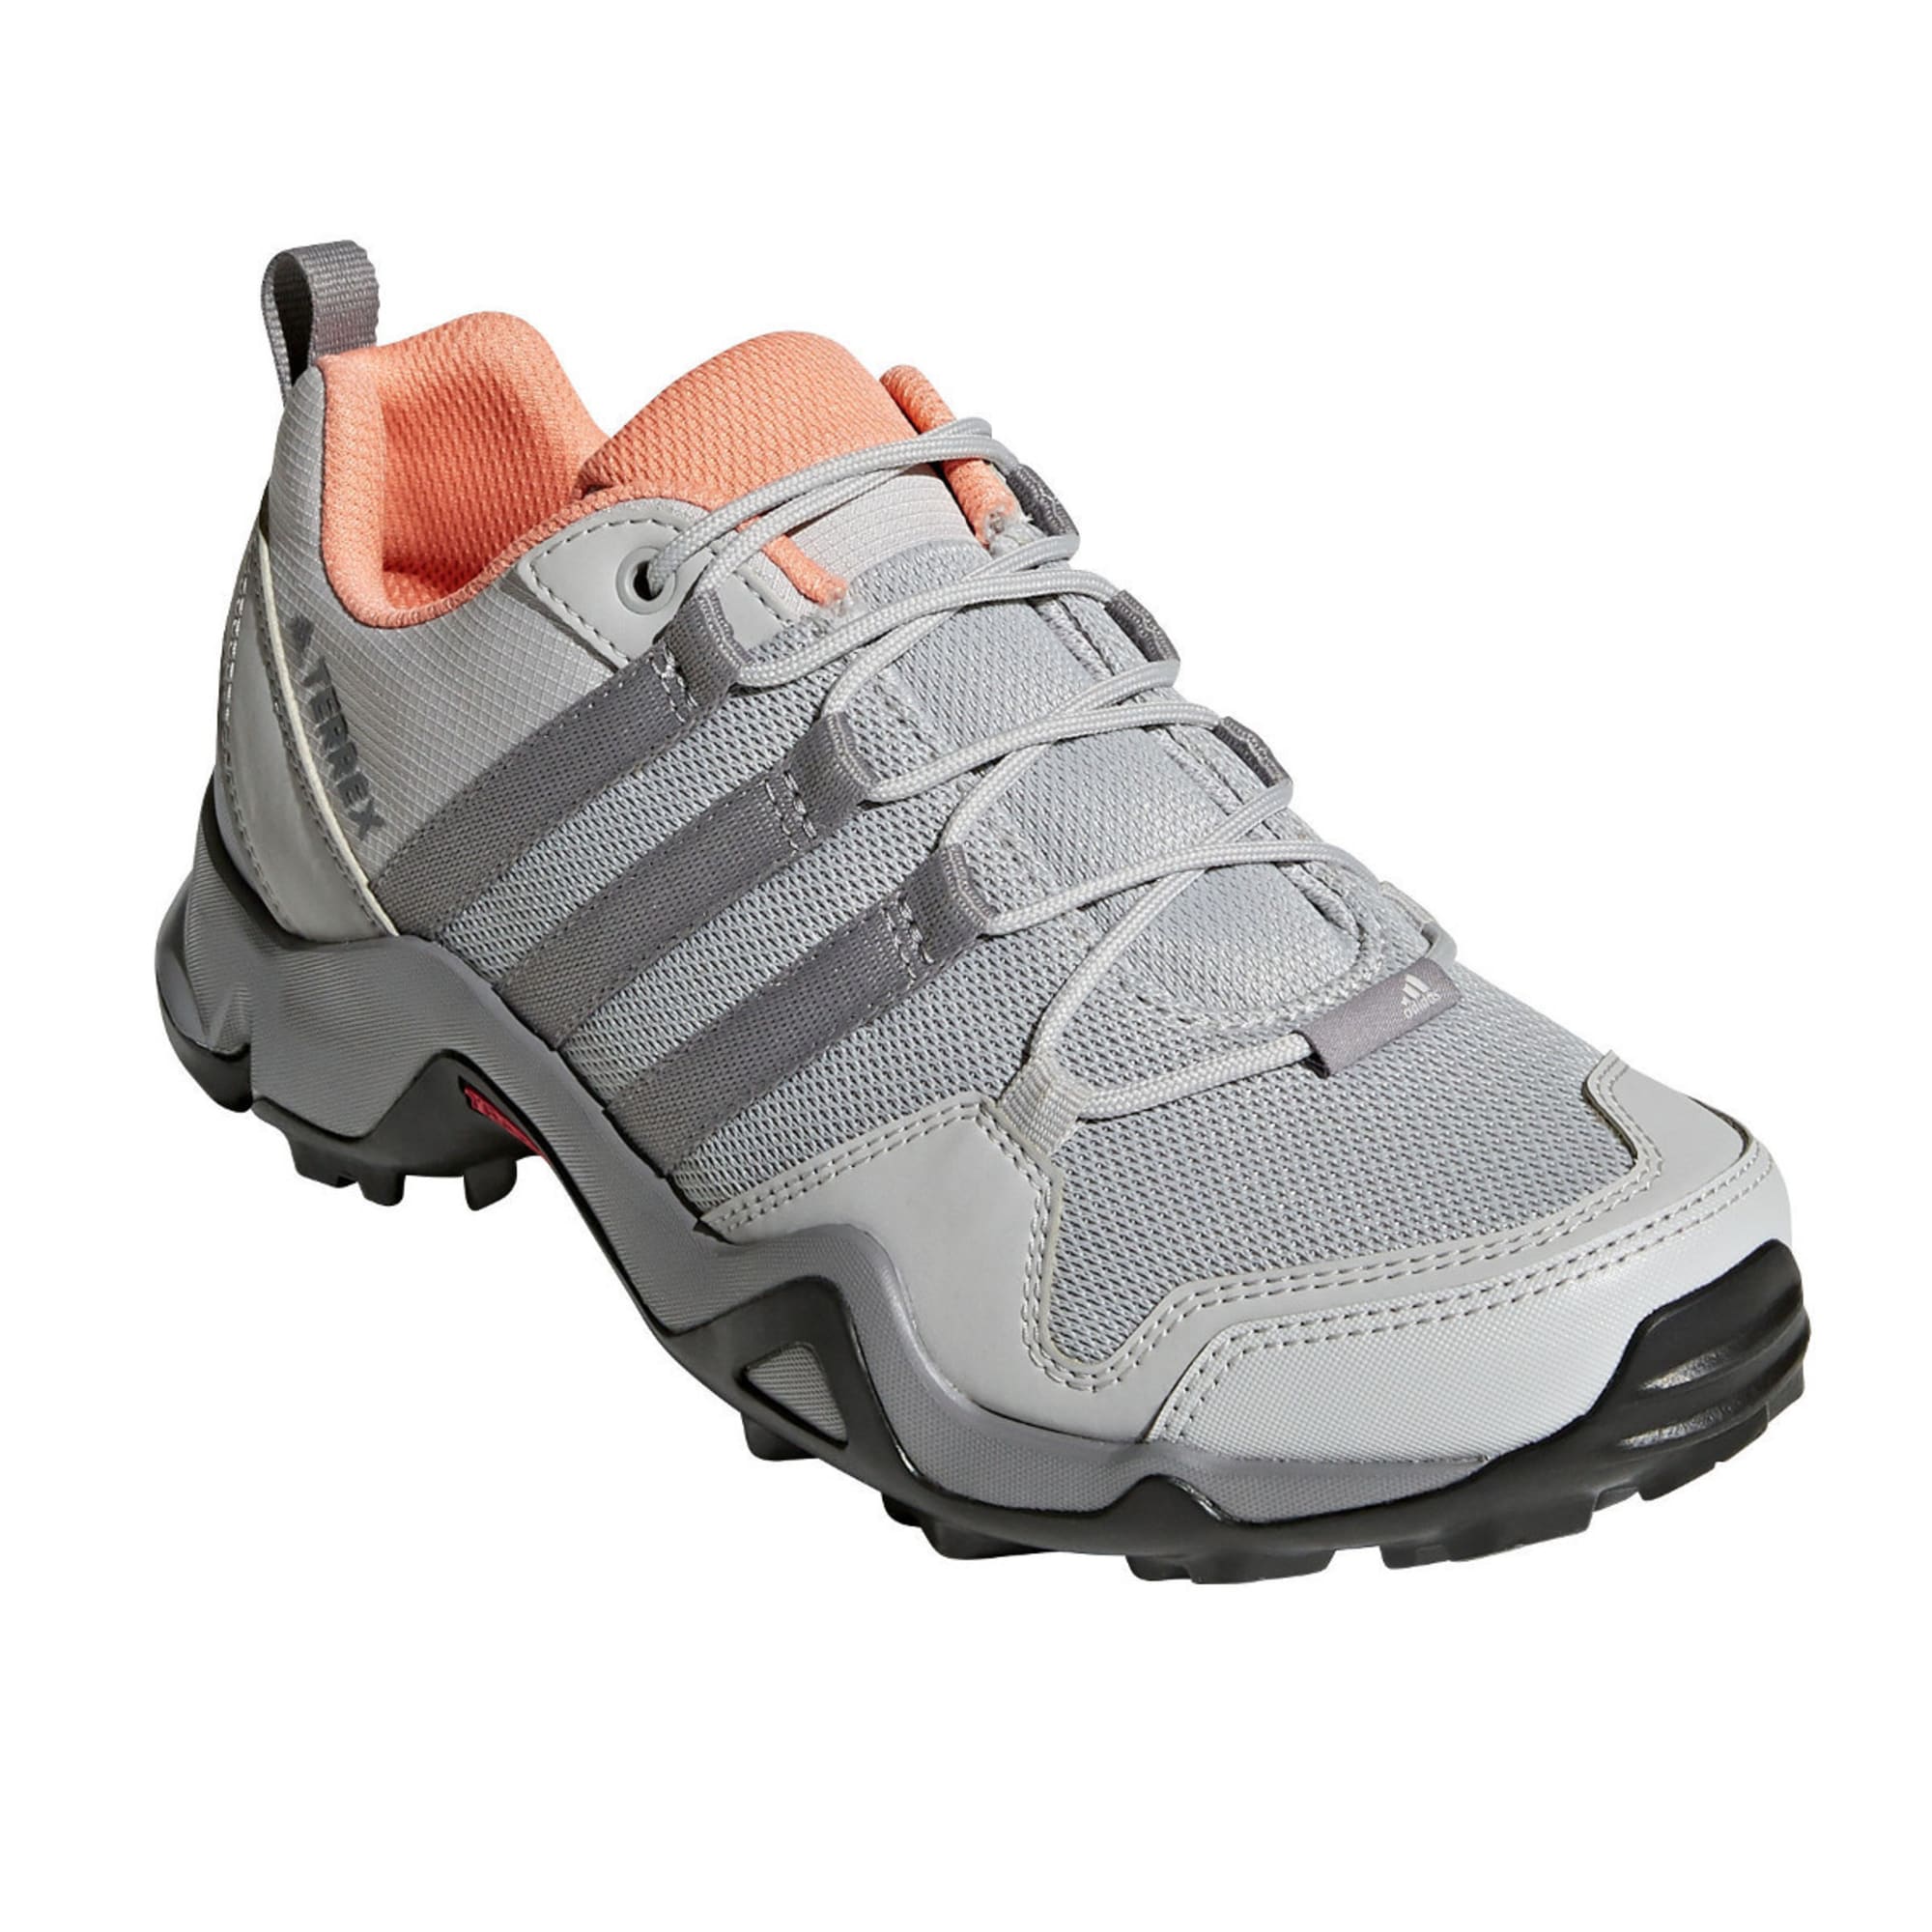 ADIDAS Women's Hiking Shoes, Black/Tactile Pink - Bob's Stores